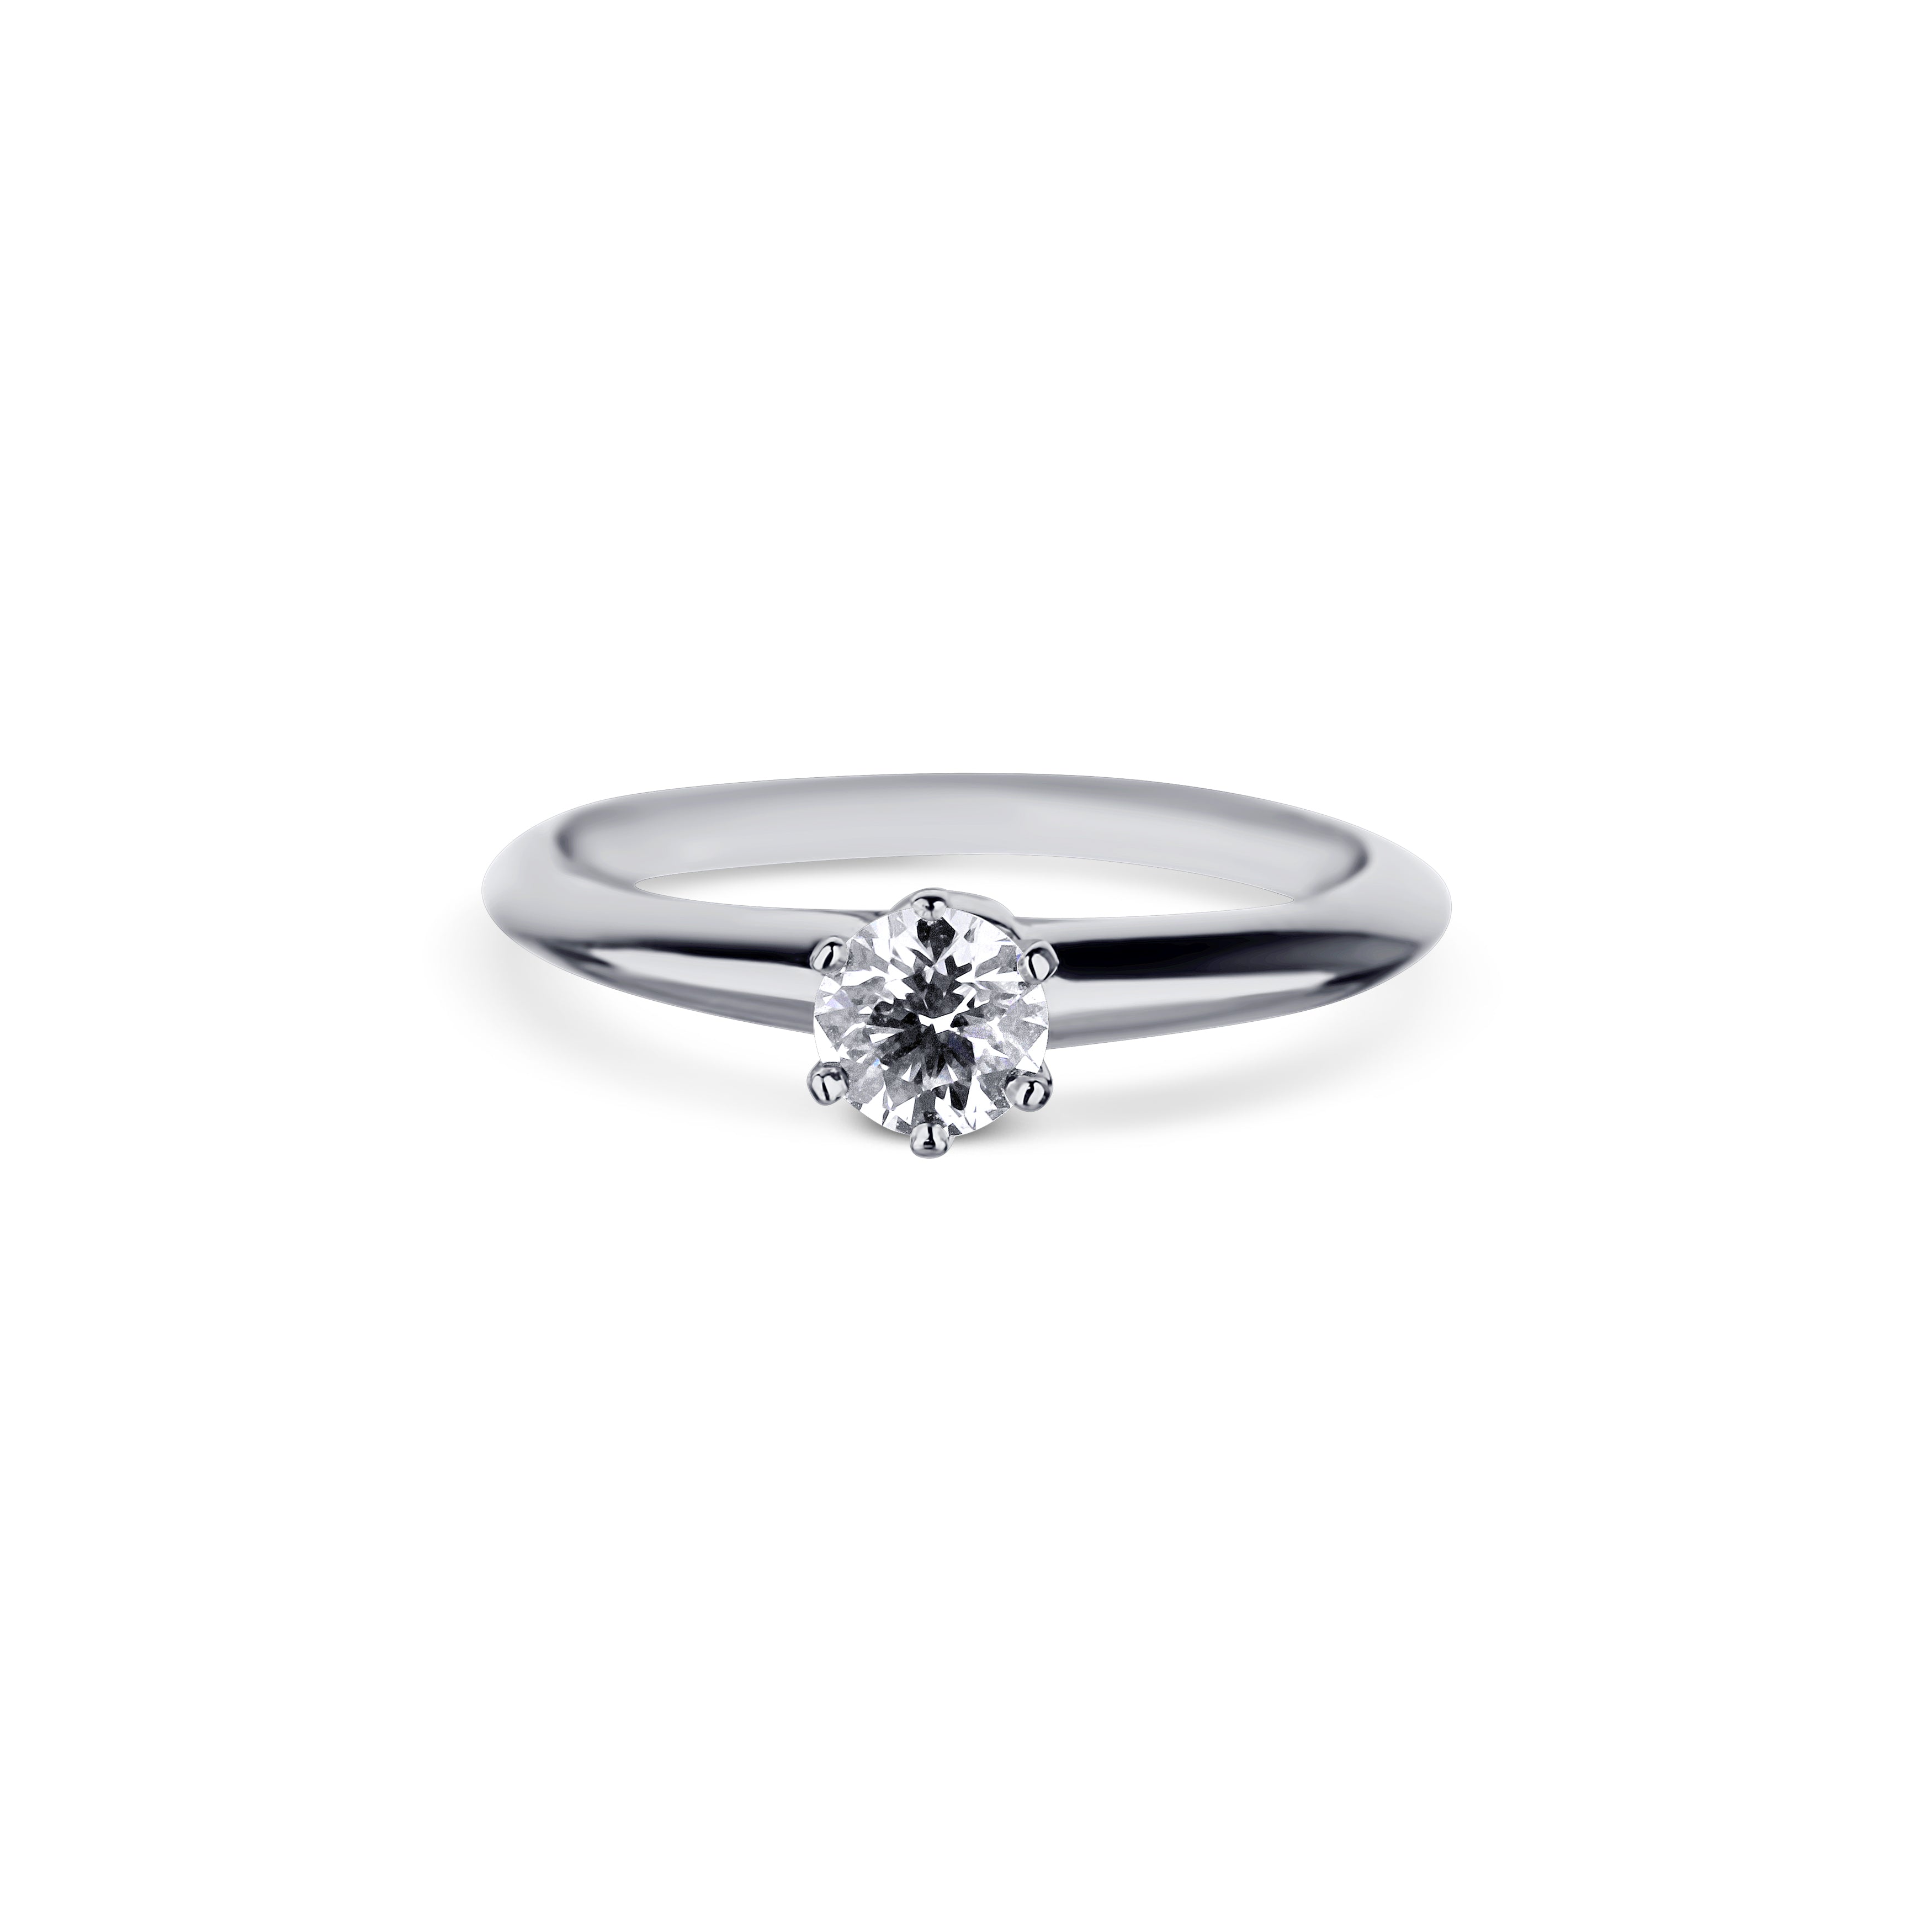 Top Platinum Engagement Rings | With Clarity